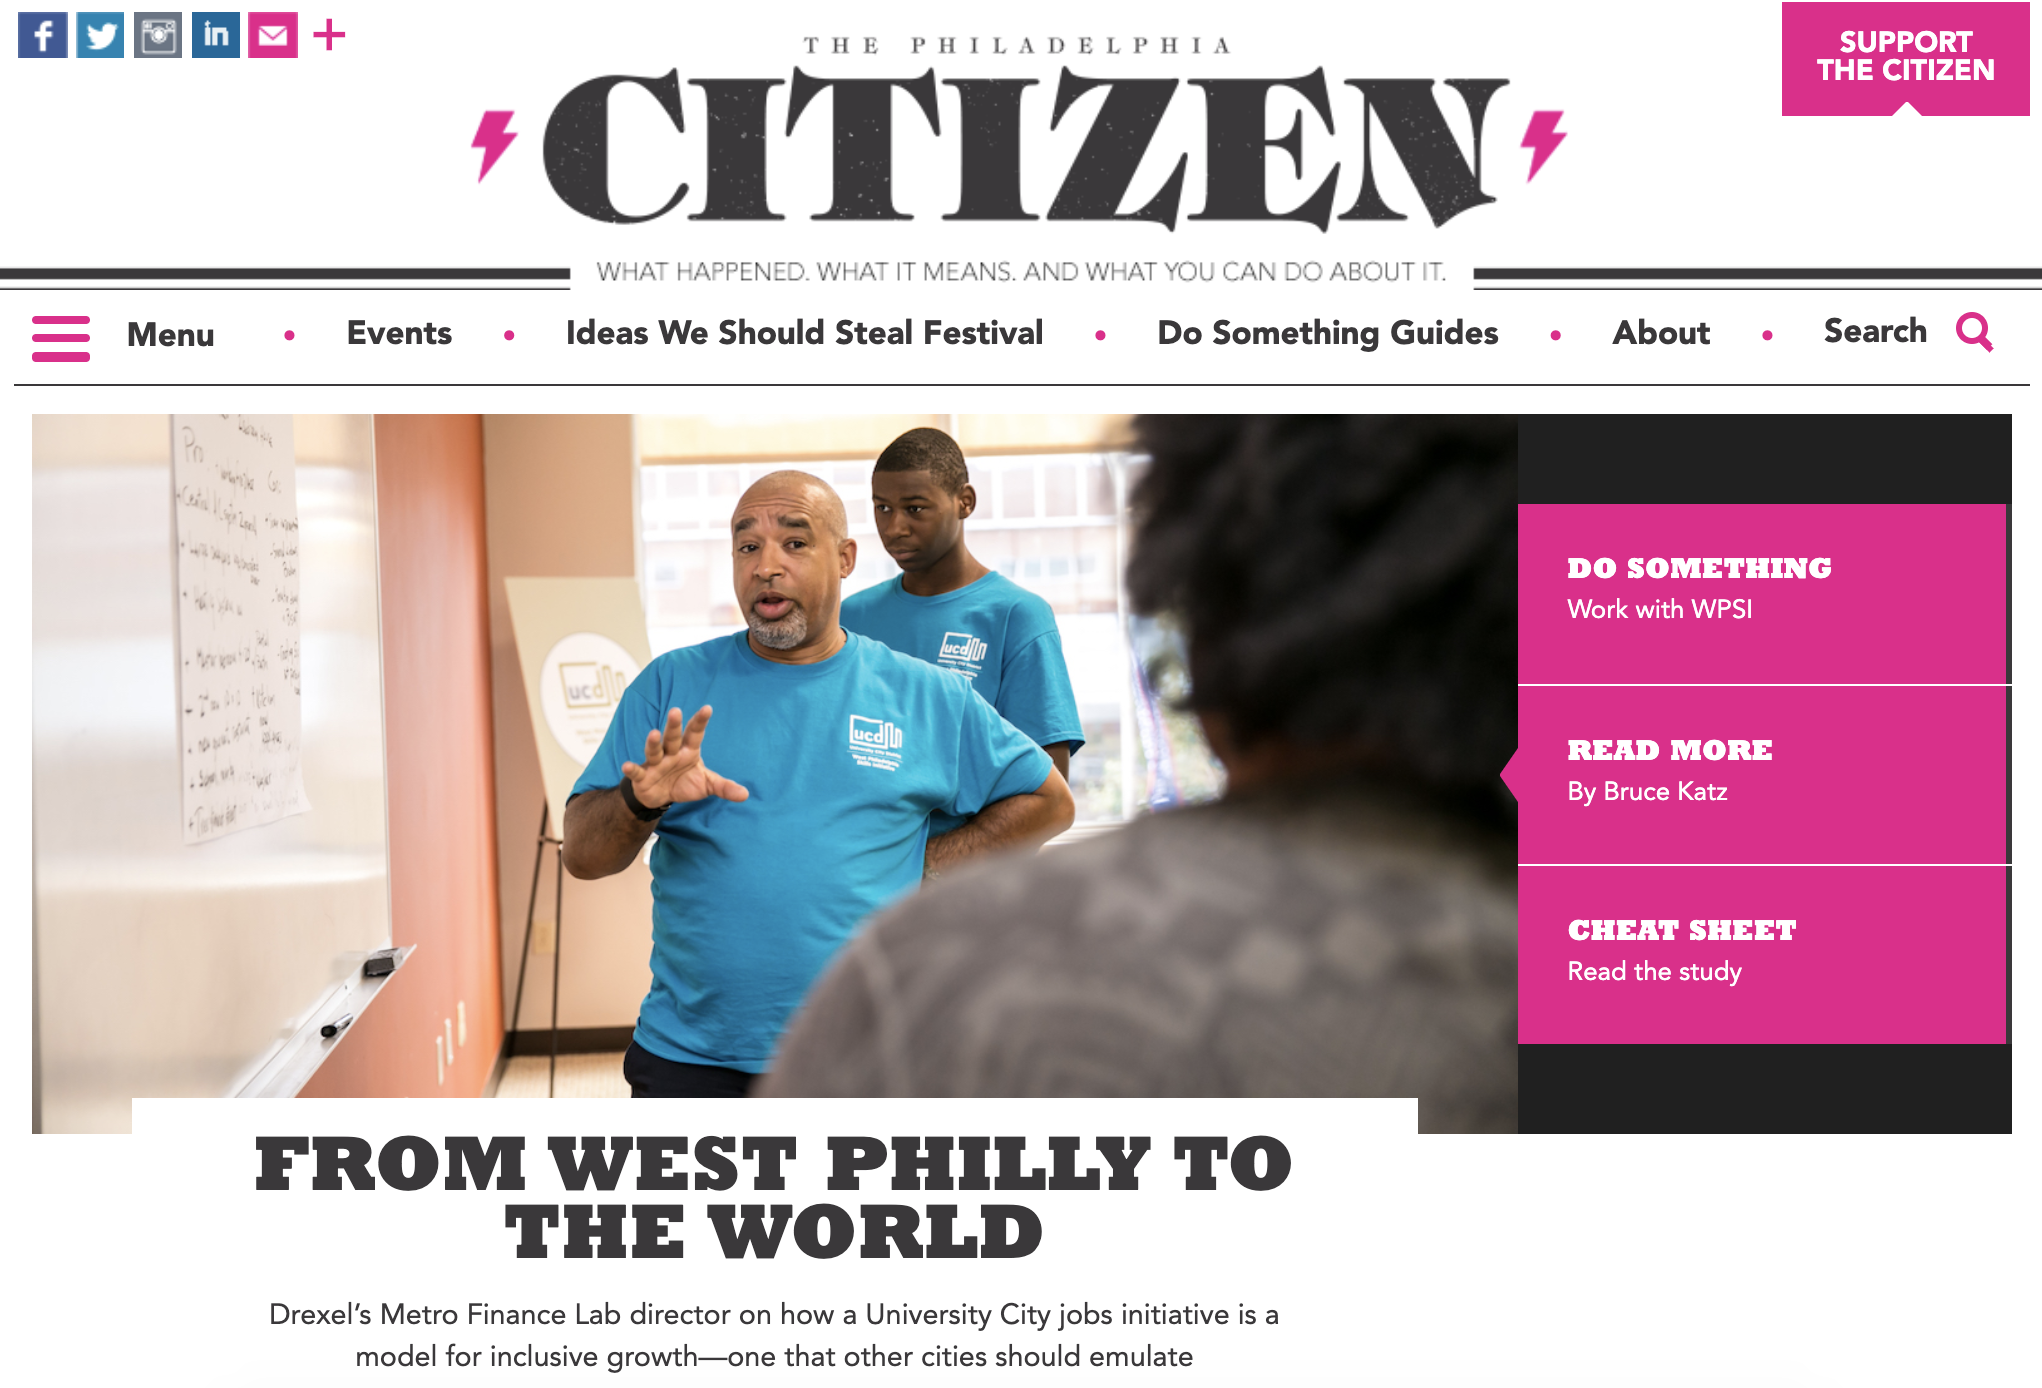 The West Philadelphia Skills Initiative (WPSI) | From West Philly to the World